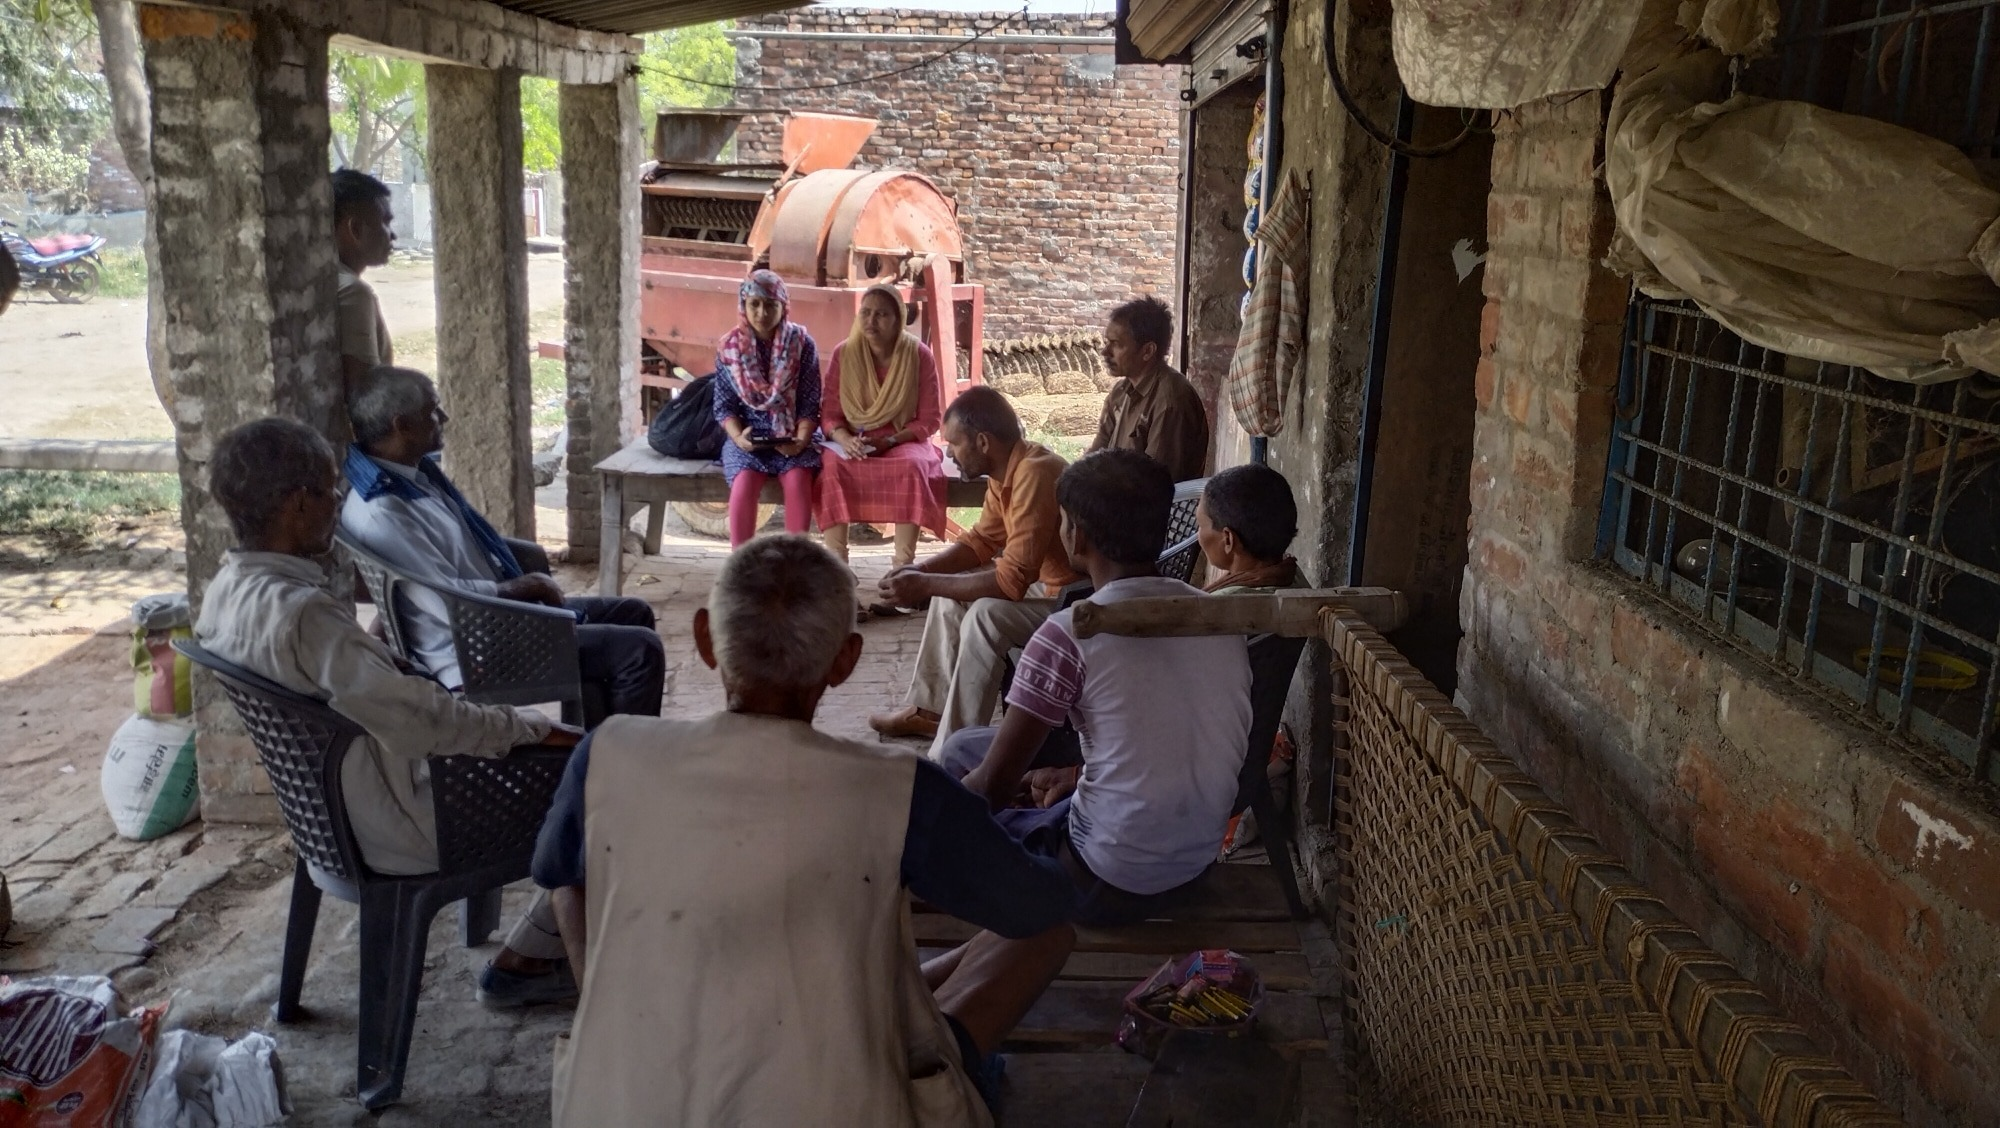 Introductory discussion about the monitoring campaign with a household in Alaulapur village